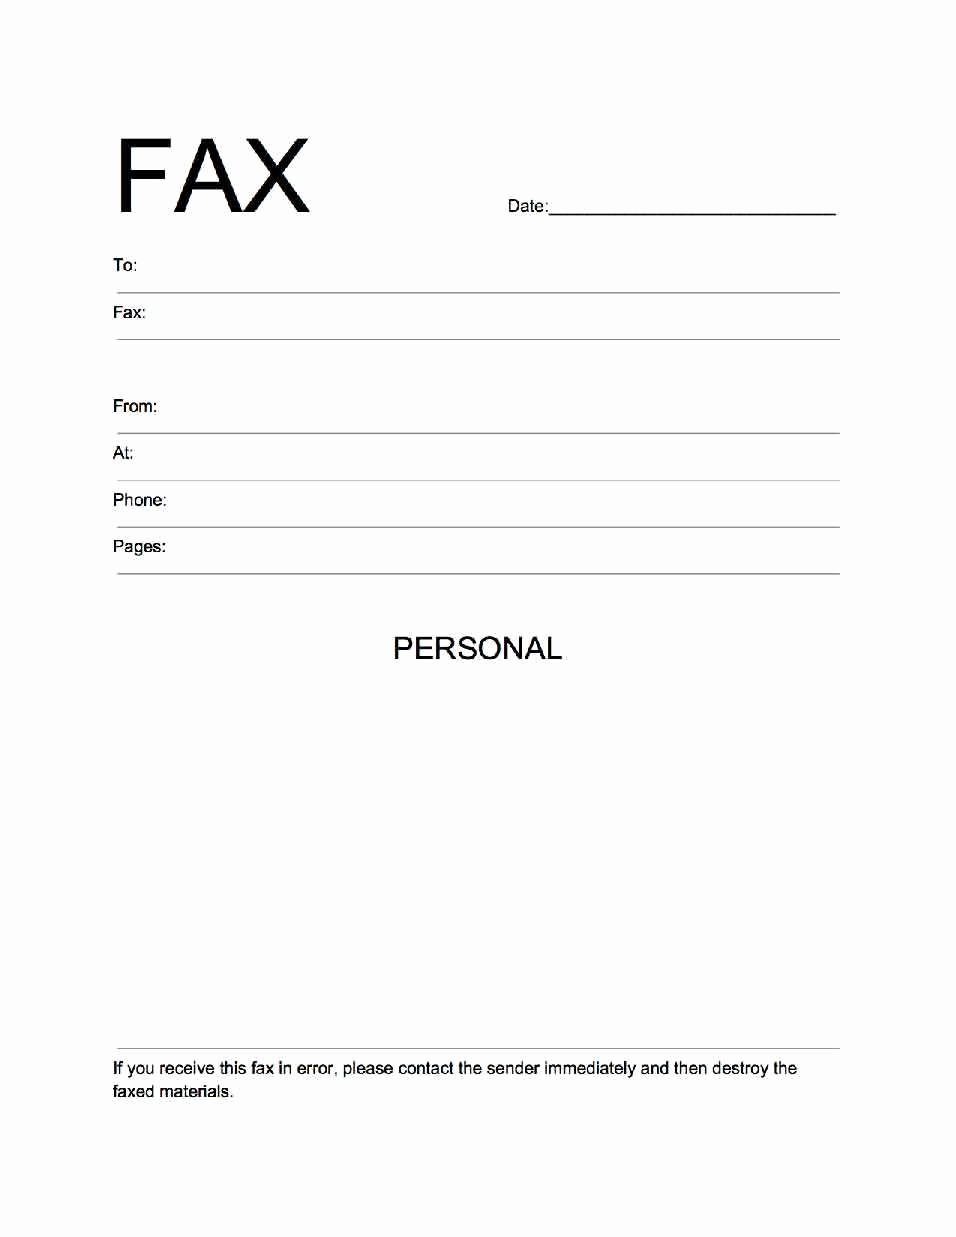 Sample Fax Cover Sheet Word Elegant Fax Cover Sheet Pdf Excel &amp; Word